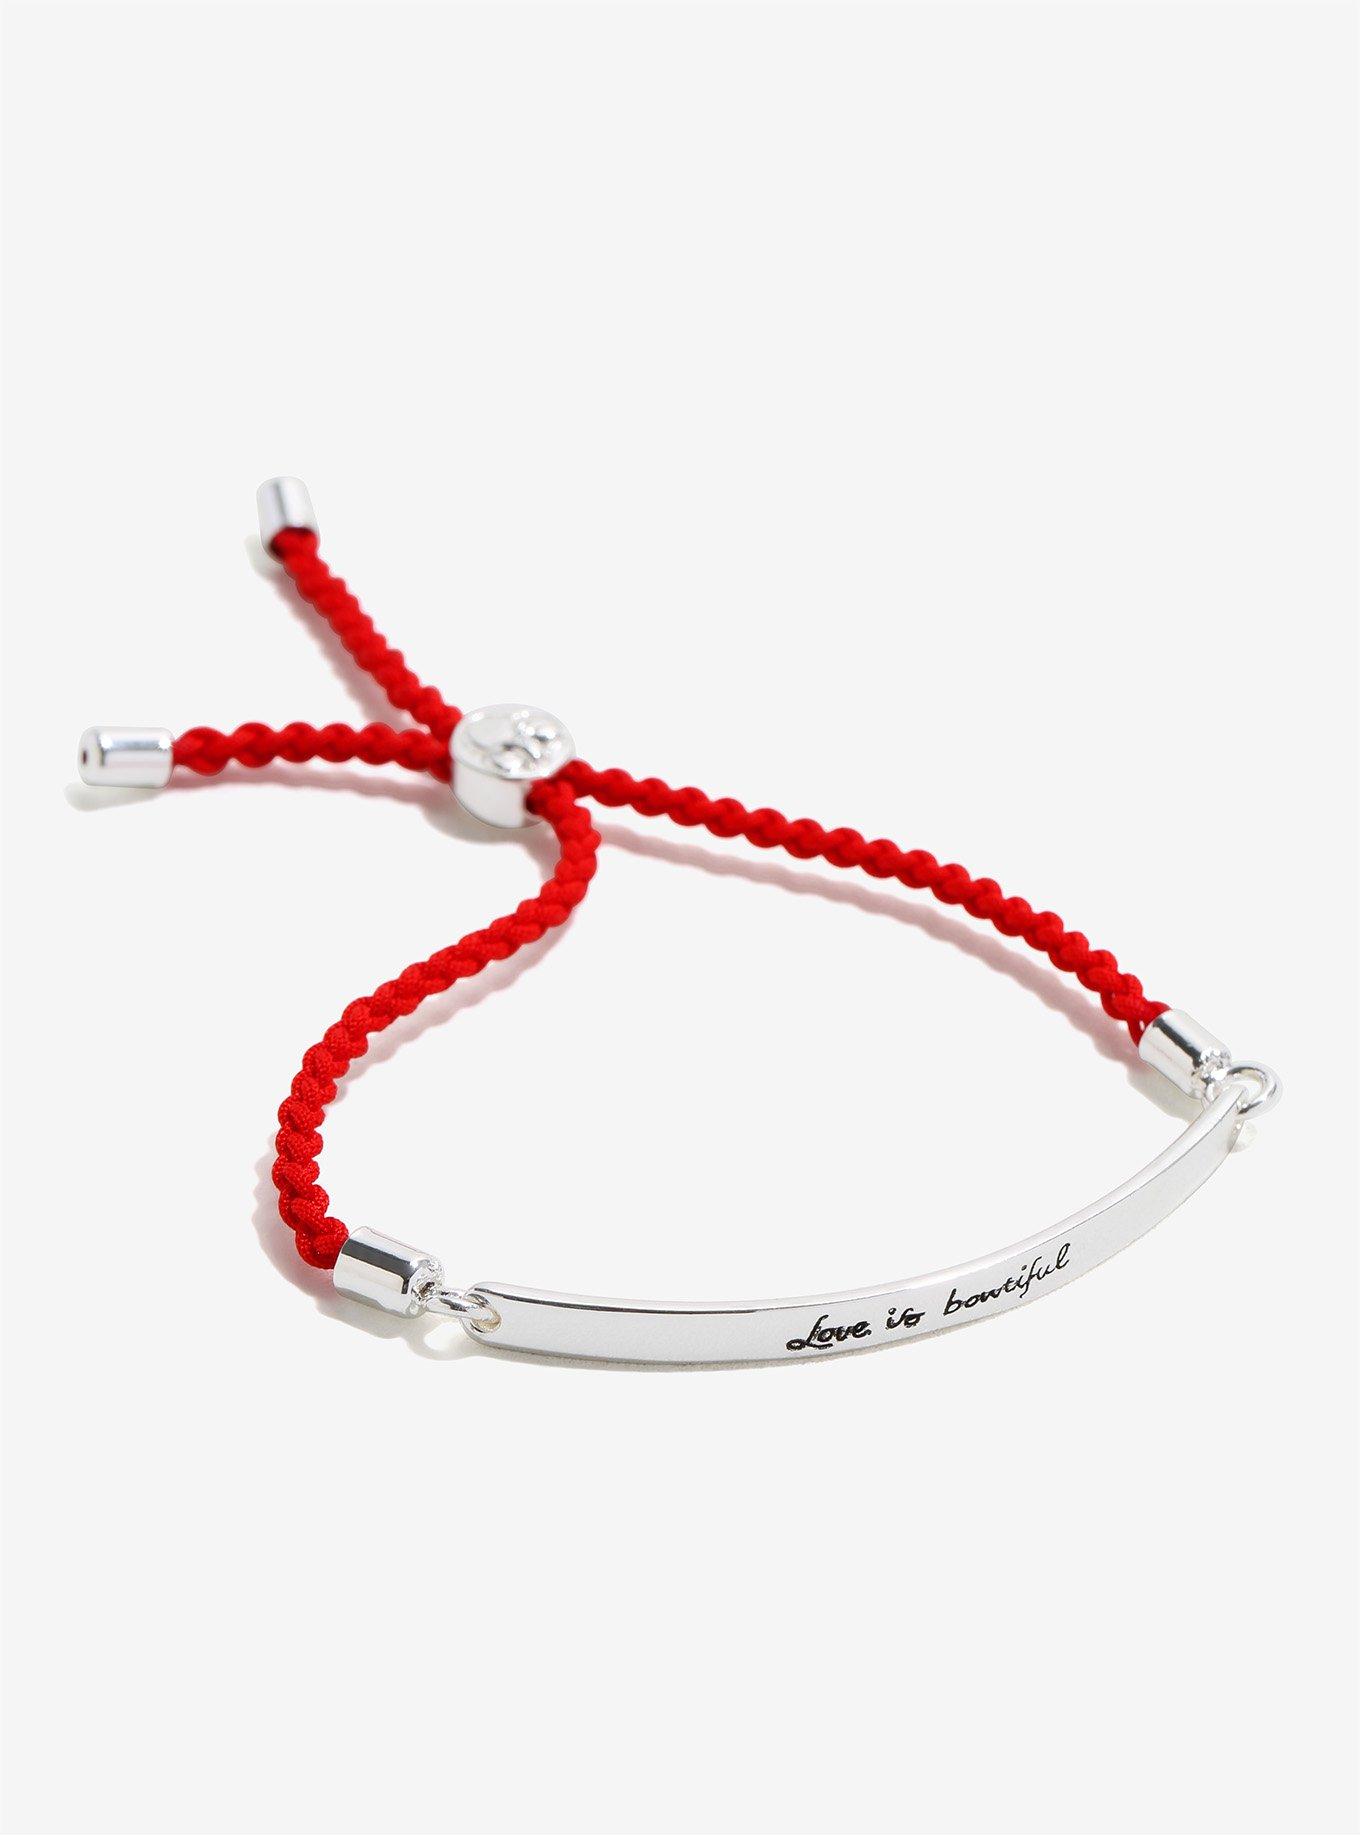 Disney Minnie Mouse Bowtiful Red Cord Bracelet, , hi-res